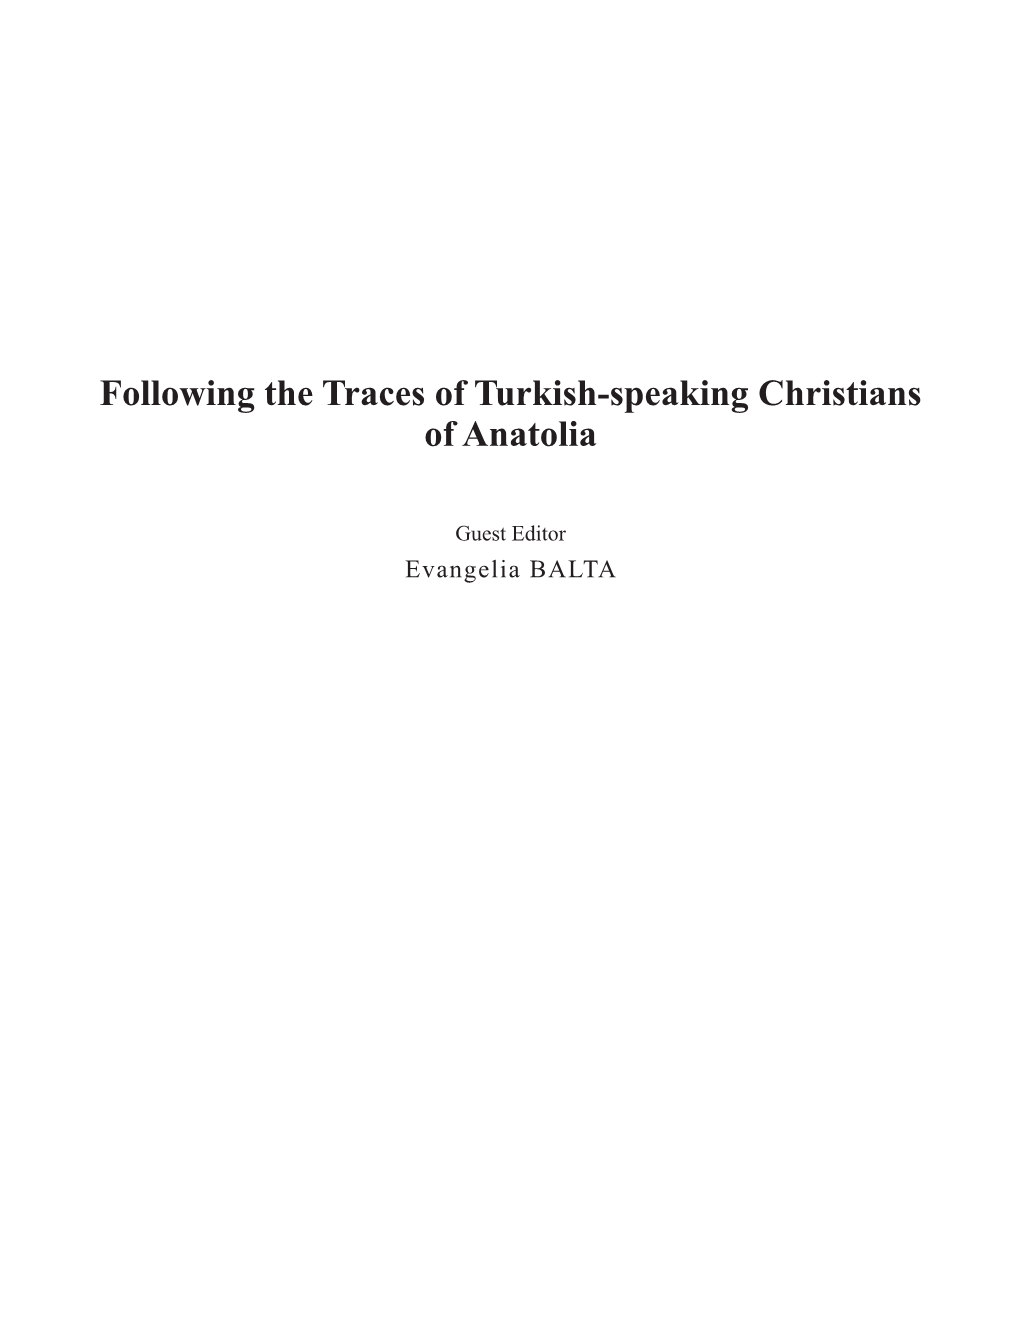 Following the Traces of Turkish-Speaking Christians of Anatolia